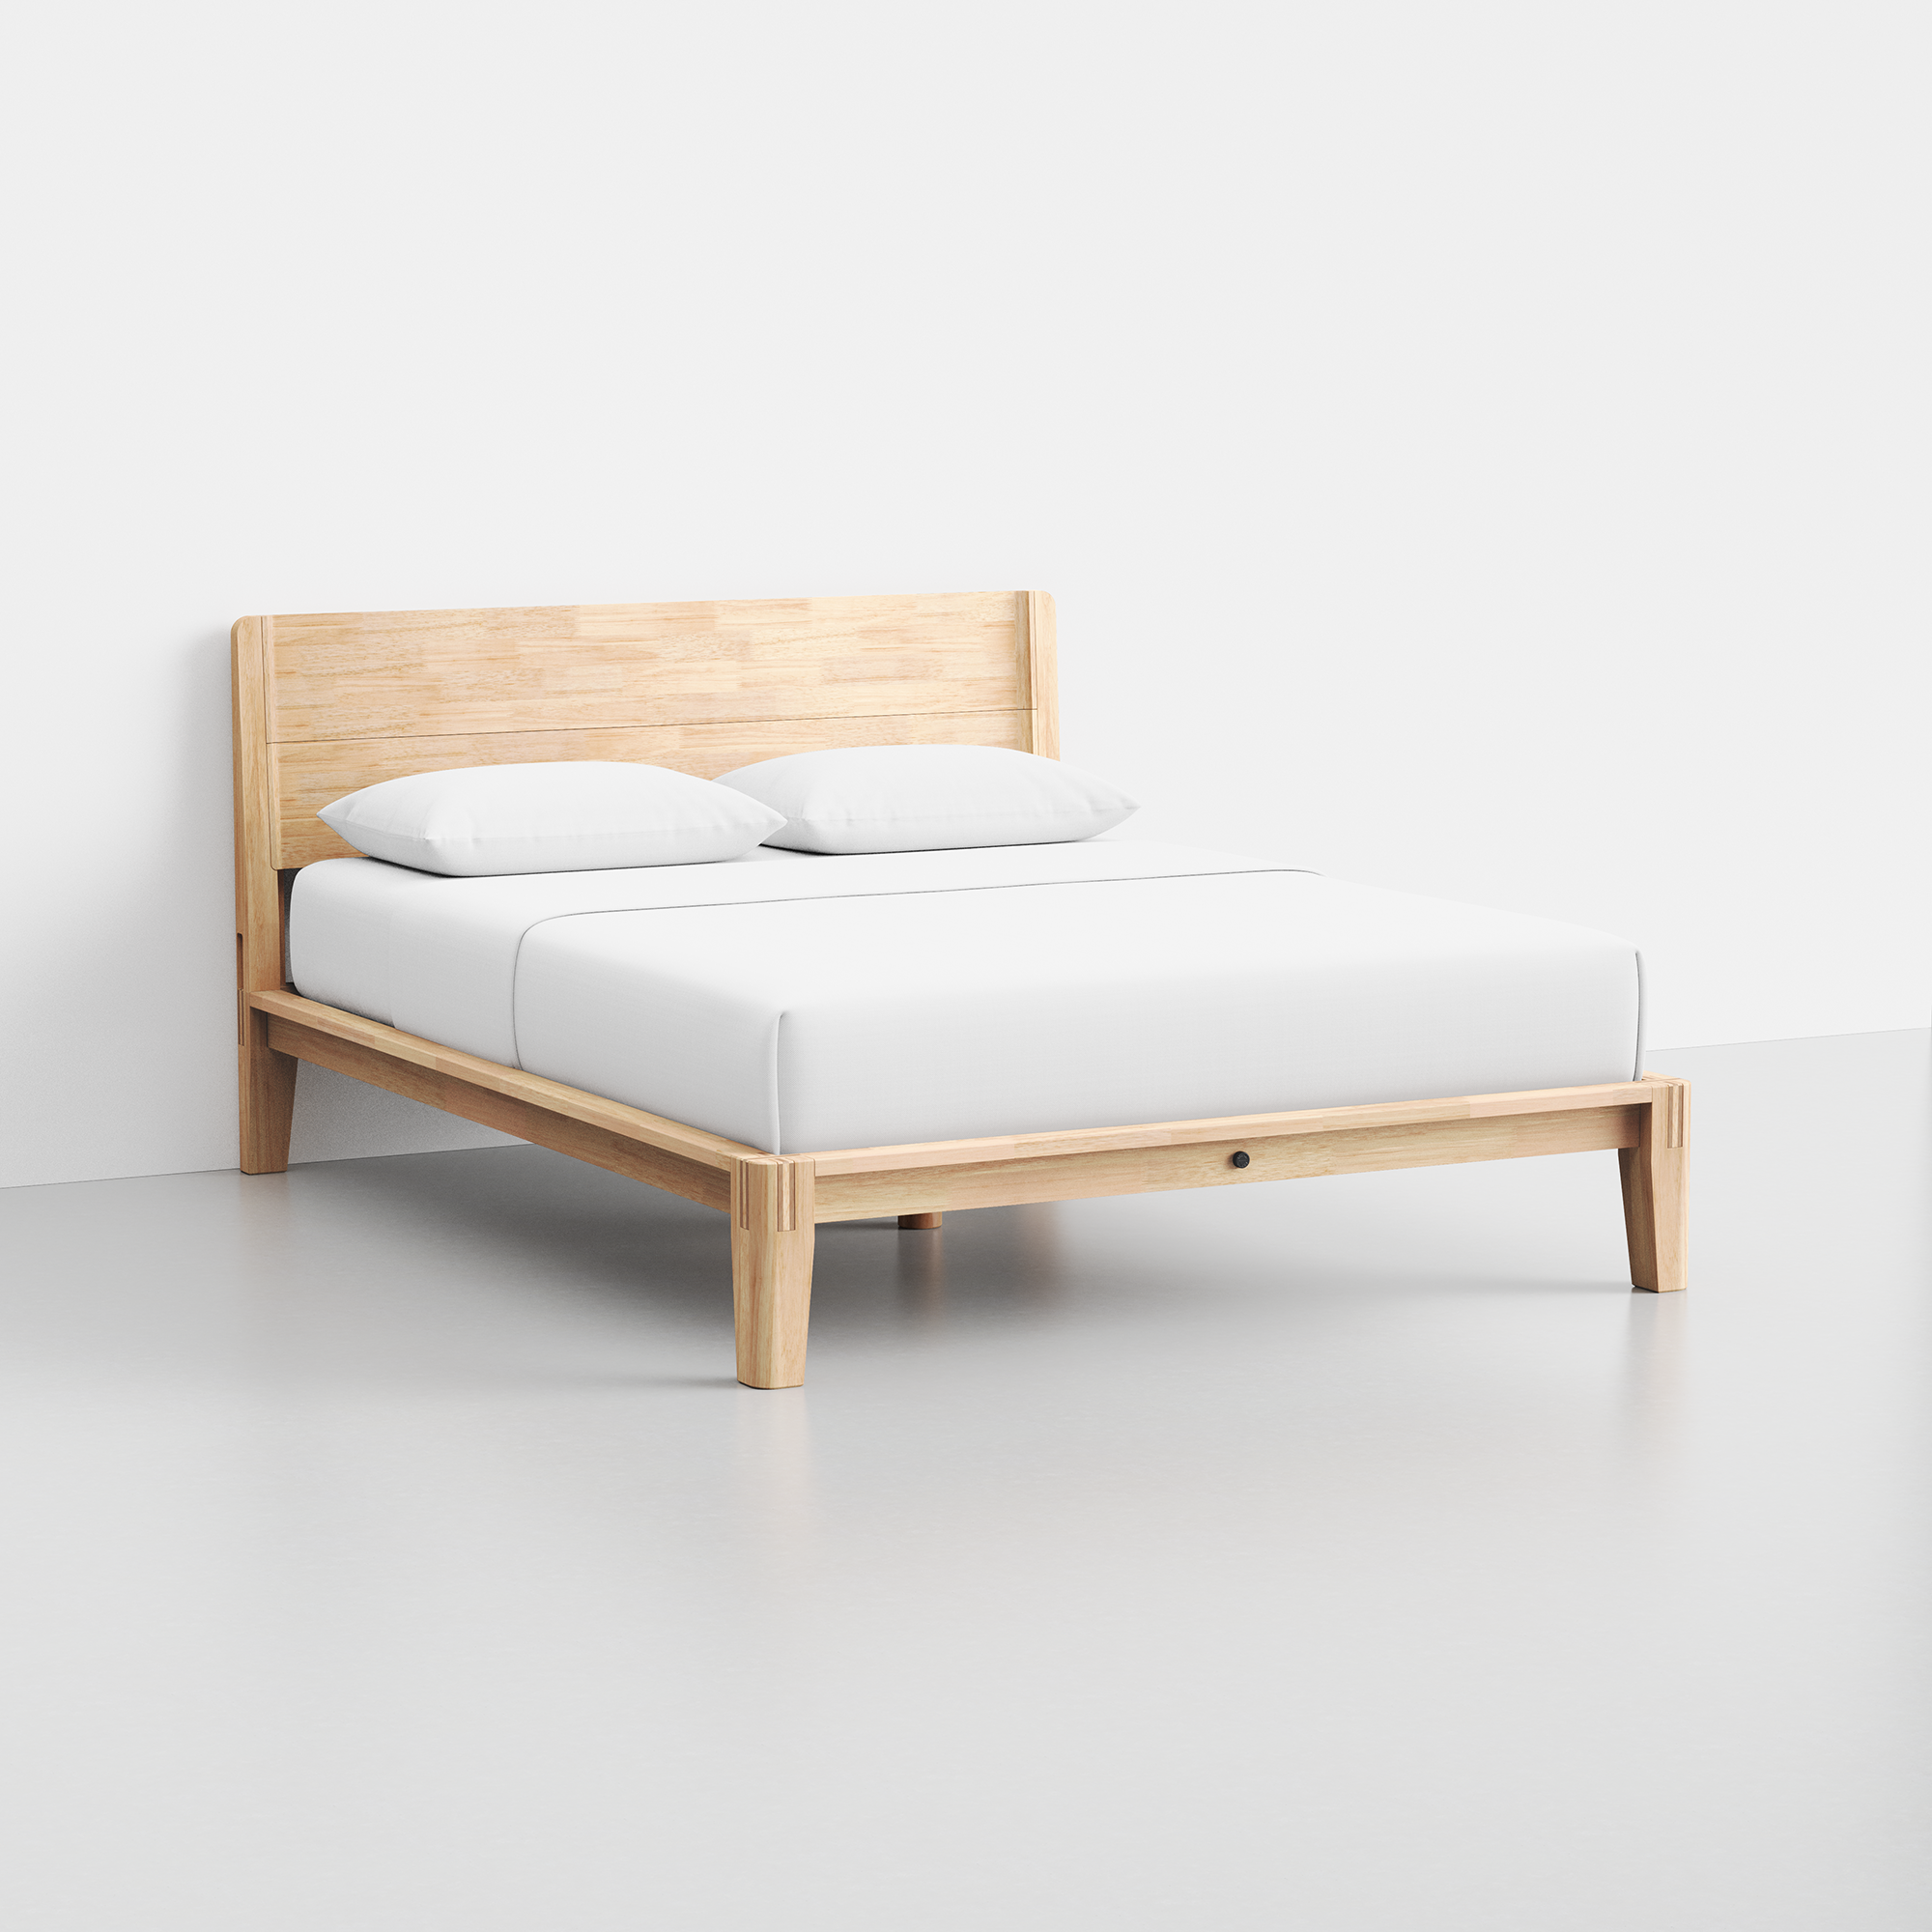 The Bed (Natural / Headboard) - Render - Angled